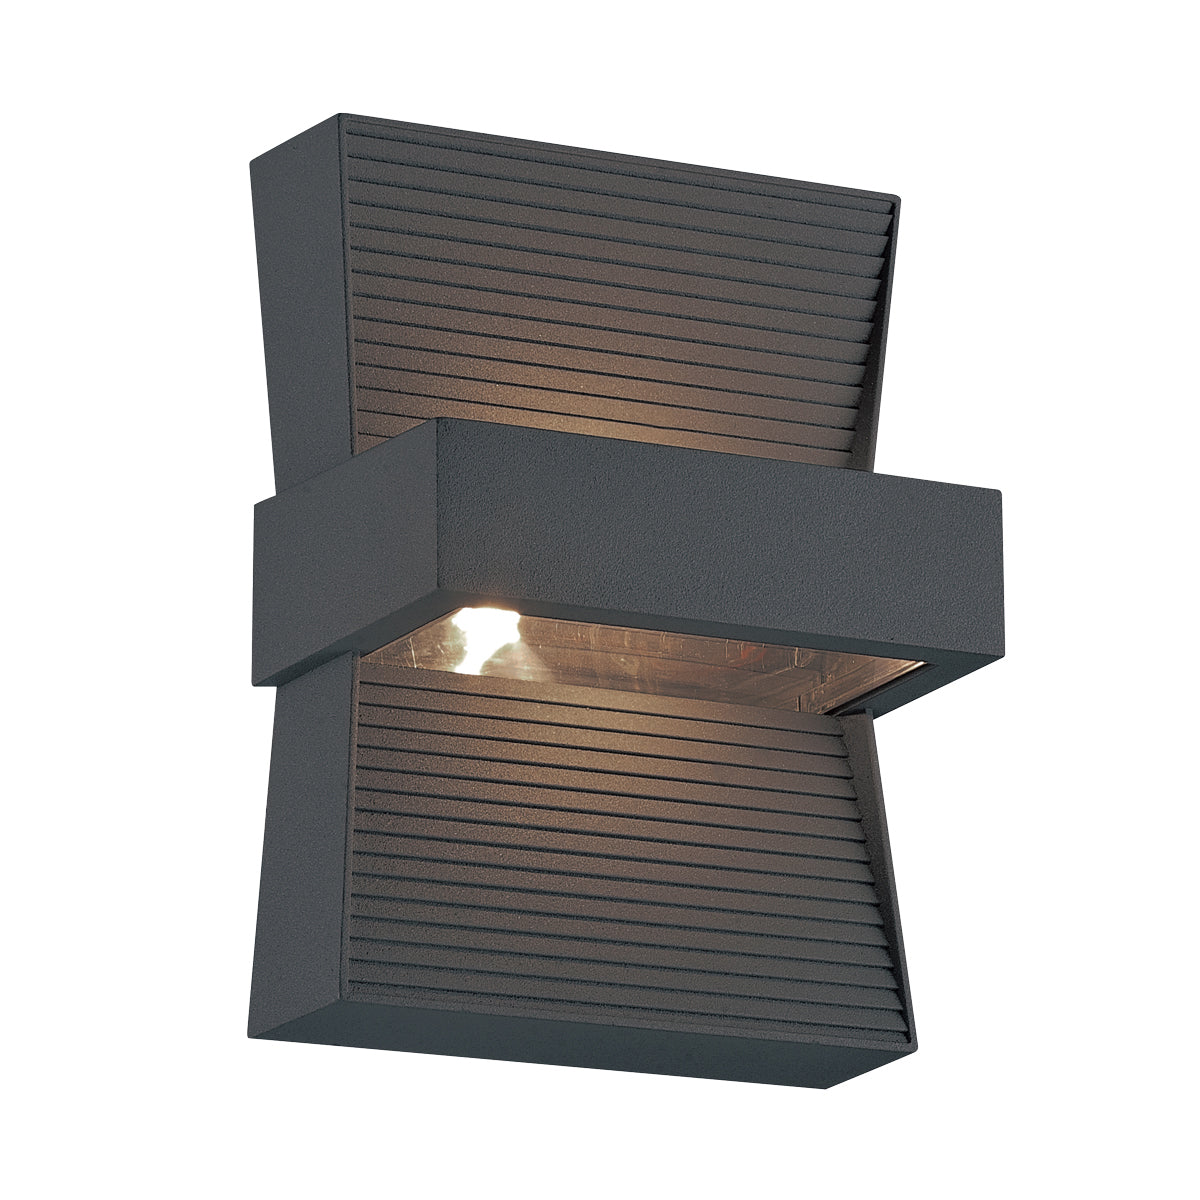 MILL Outdoor sconce Aluminum - 28279-020 INTEGRATED LED | EUROFASE